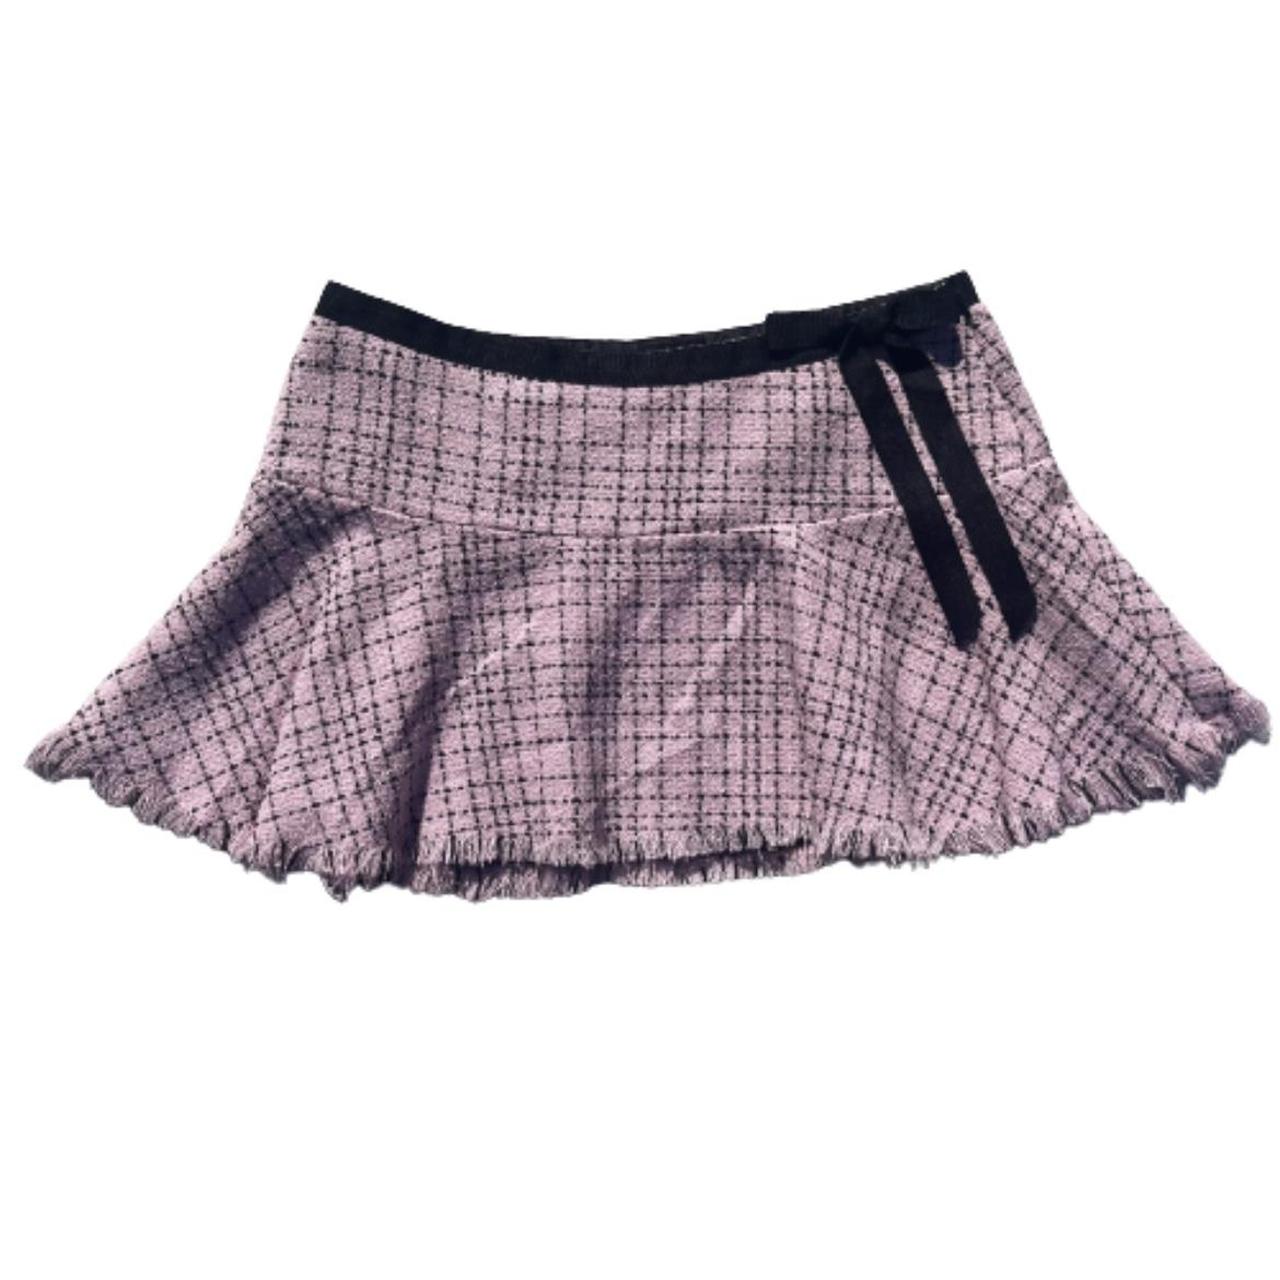 pink and black plaid mini skirt Happy to provide... - Depop